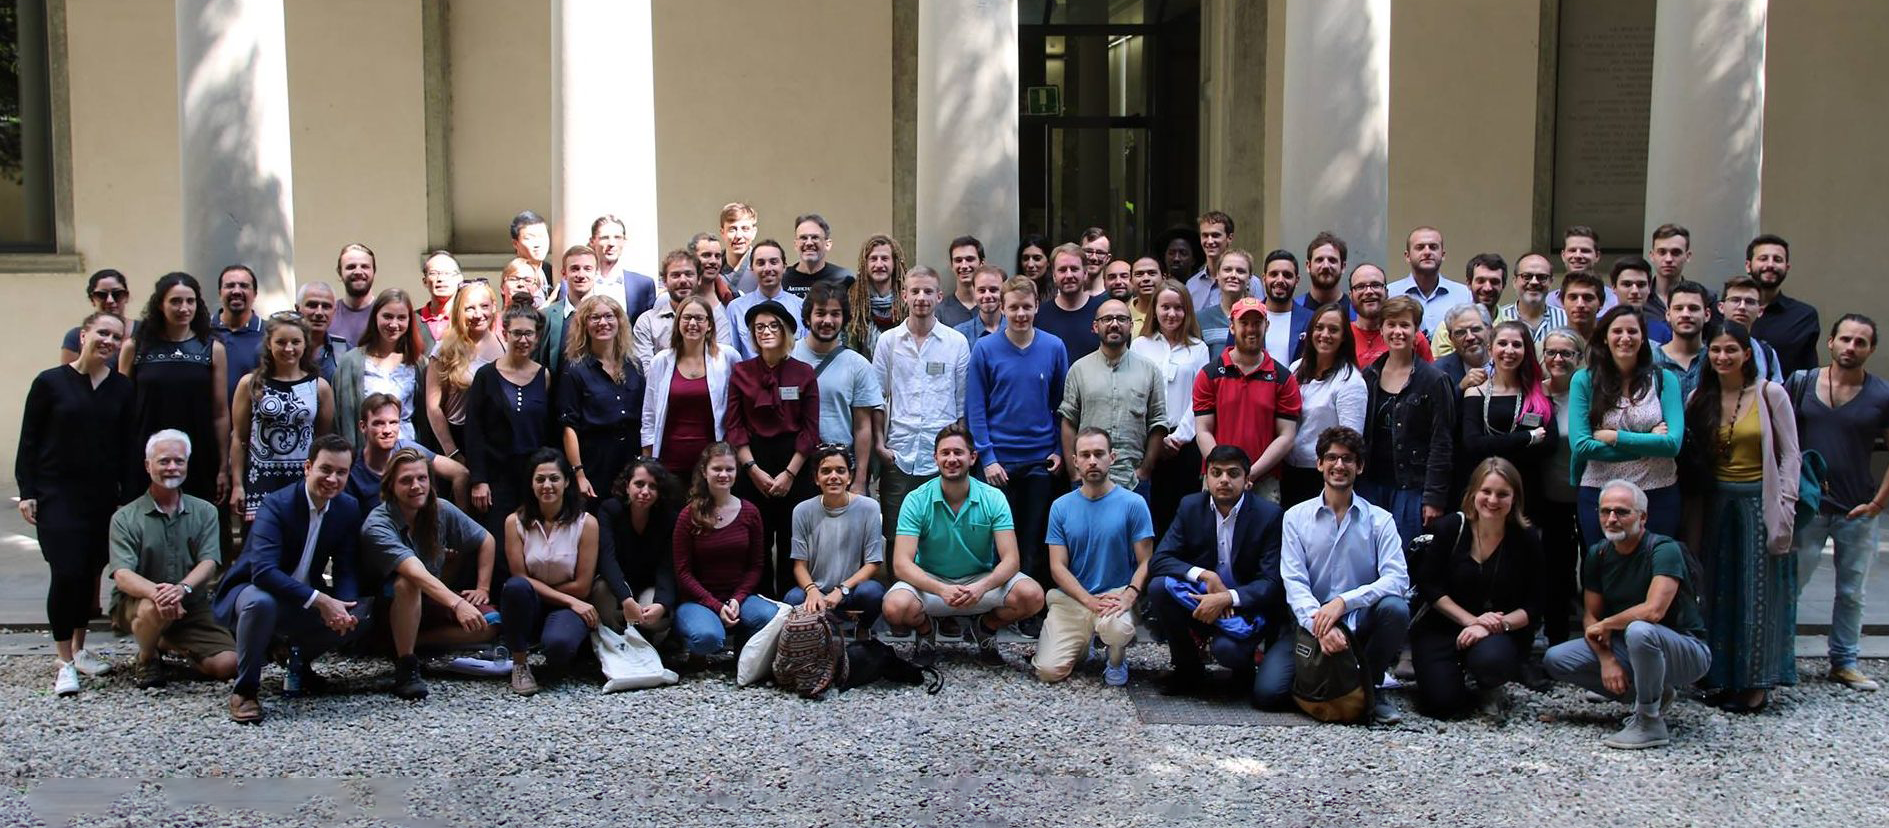 The Club of Rome Summer Academy - Challenging an unsustainable economic system